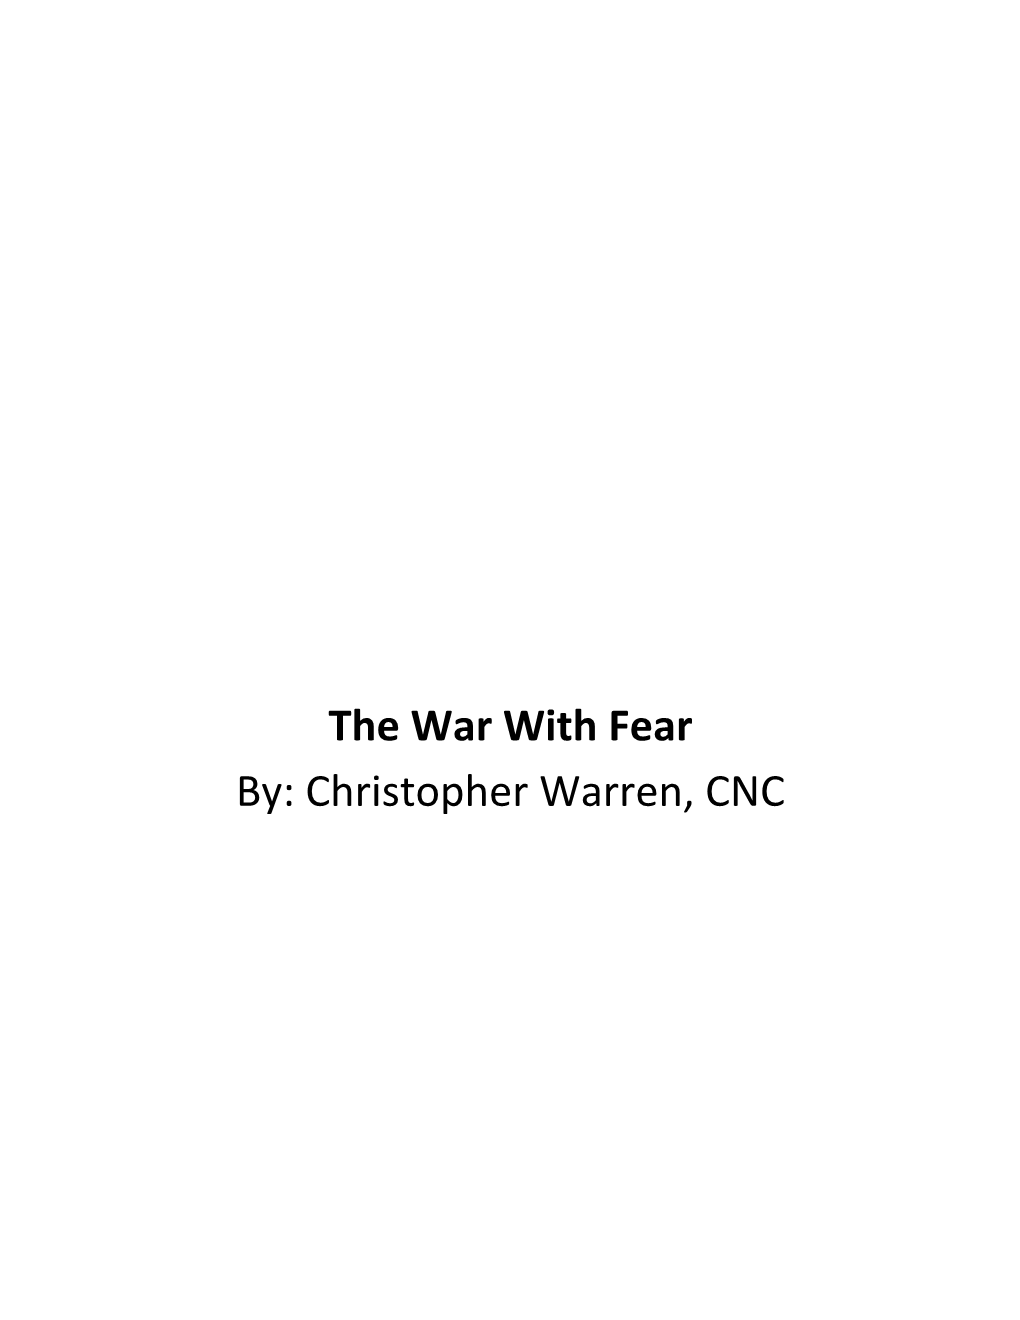 The War with Fear